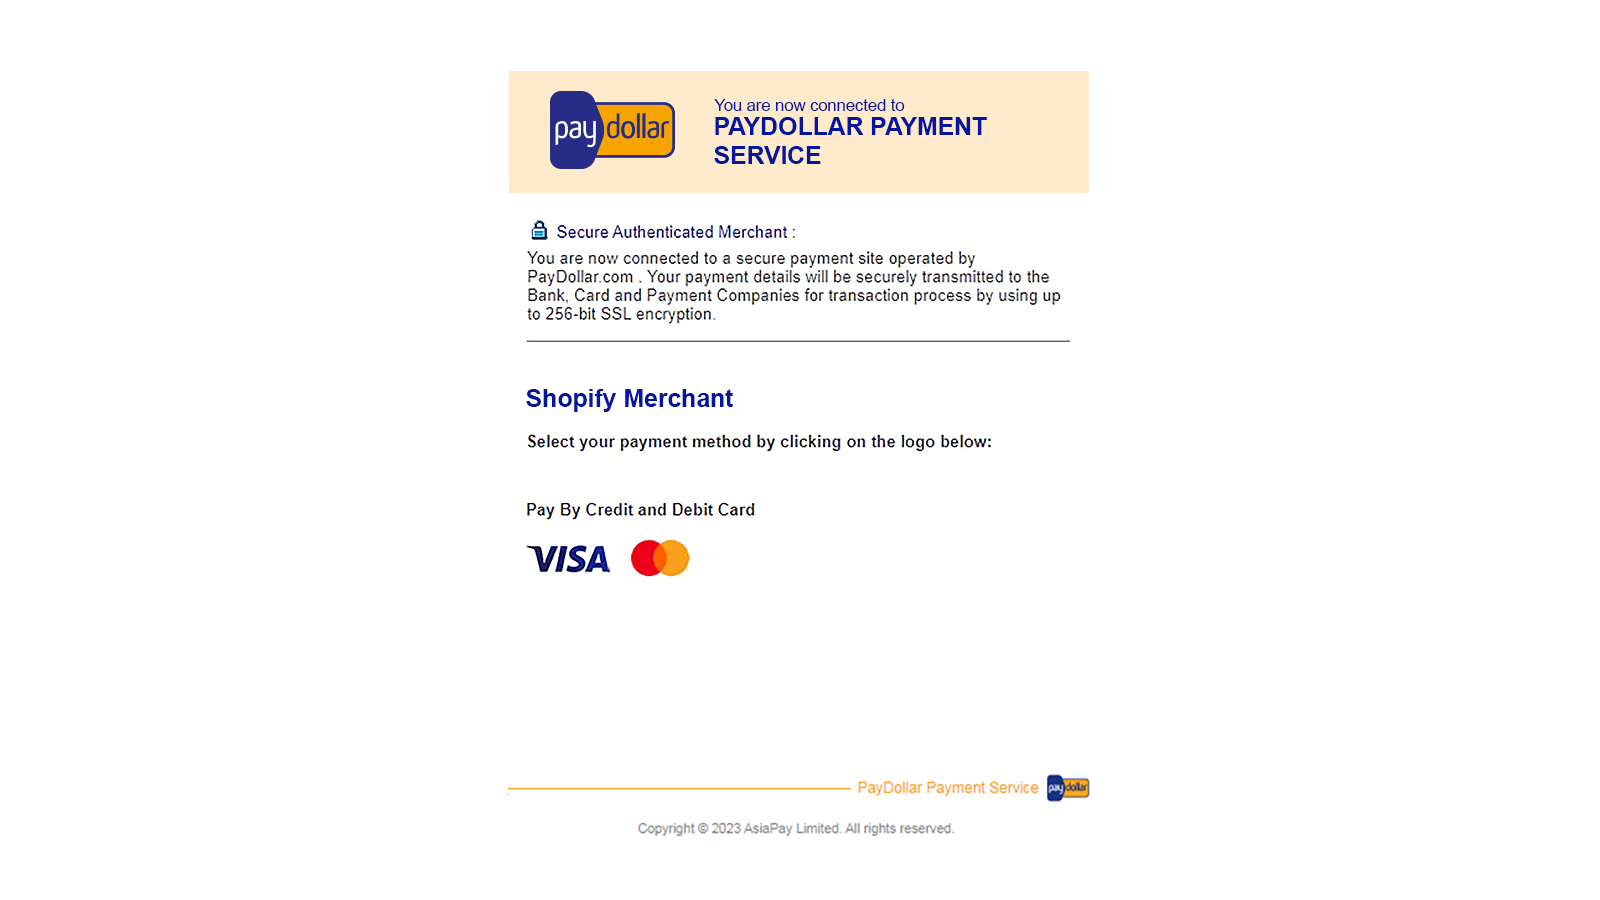 Select the payment methods